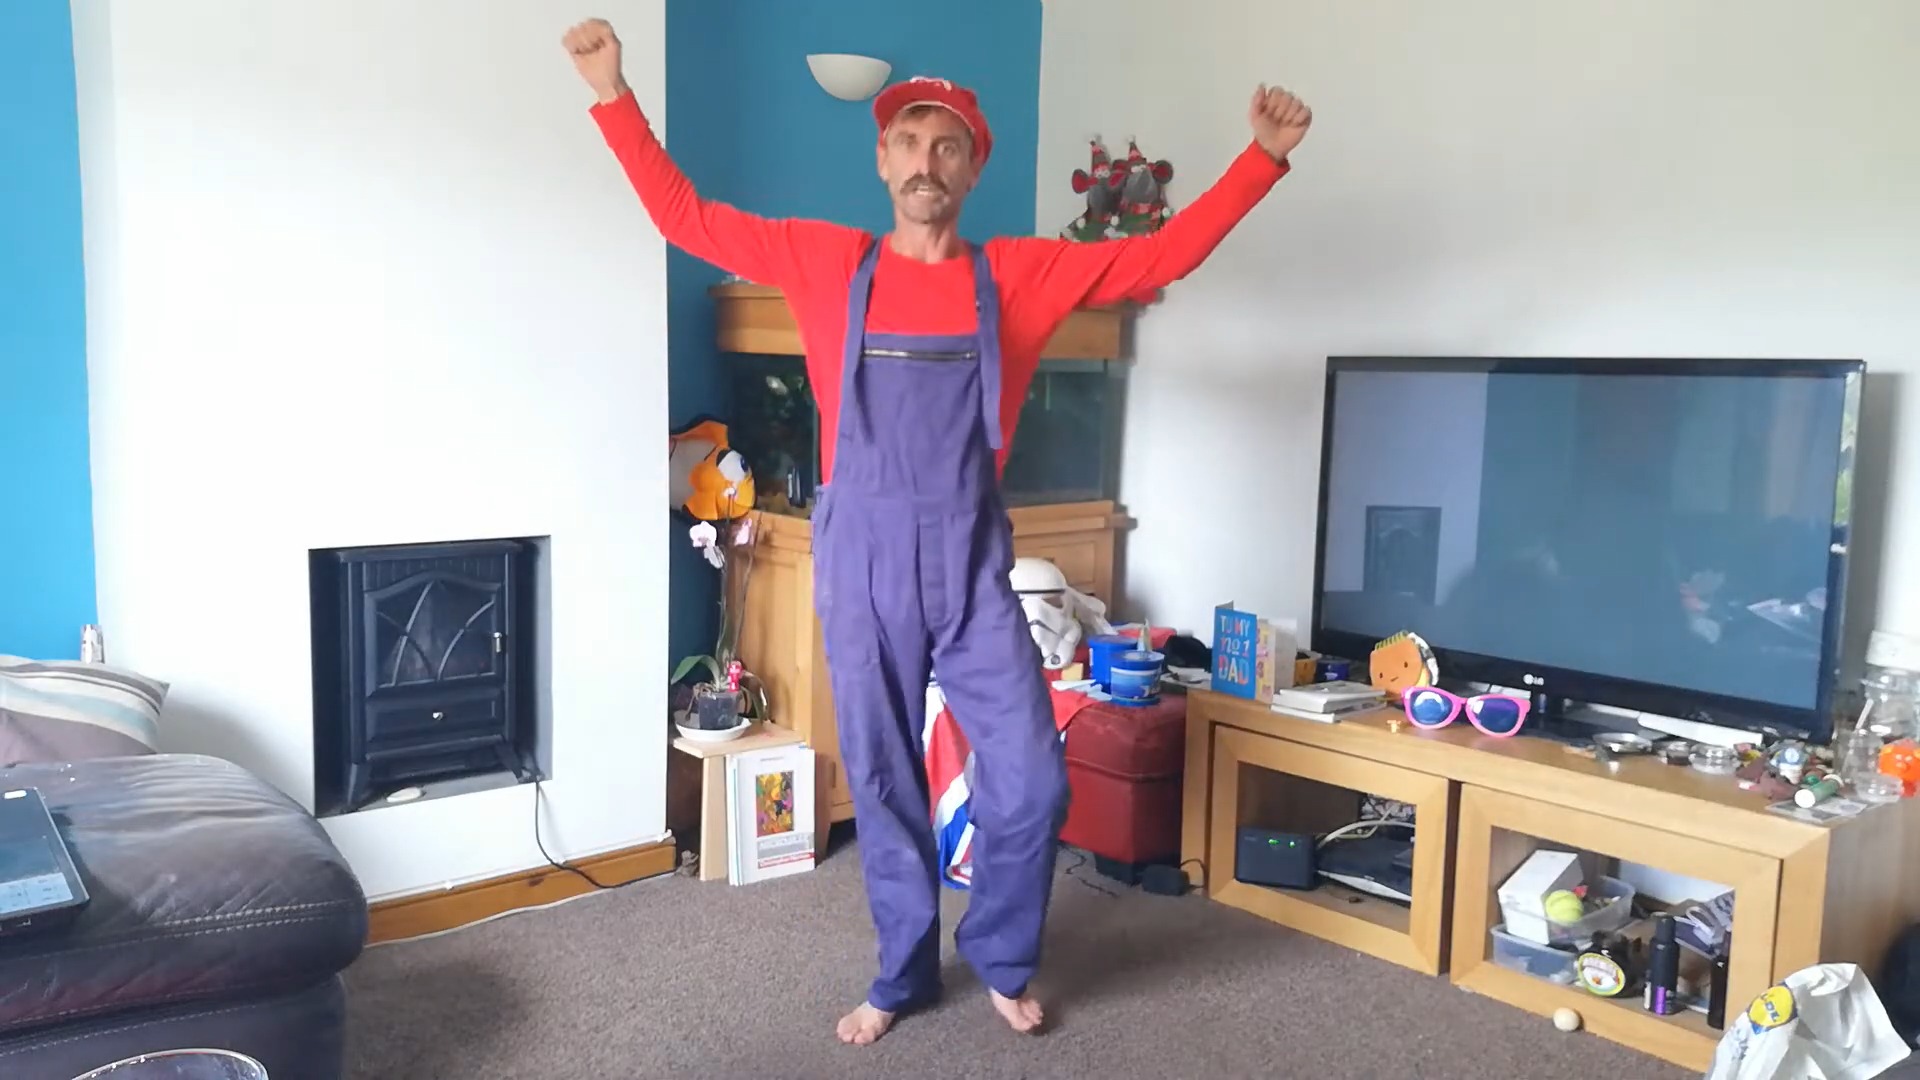 Nathan Jogging on the spot as Super Mario (Source:YouTube/Ironsiesfancydressfitness!)